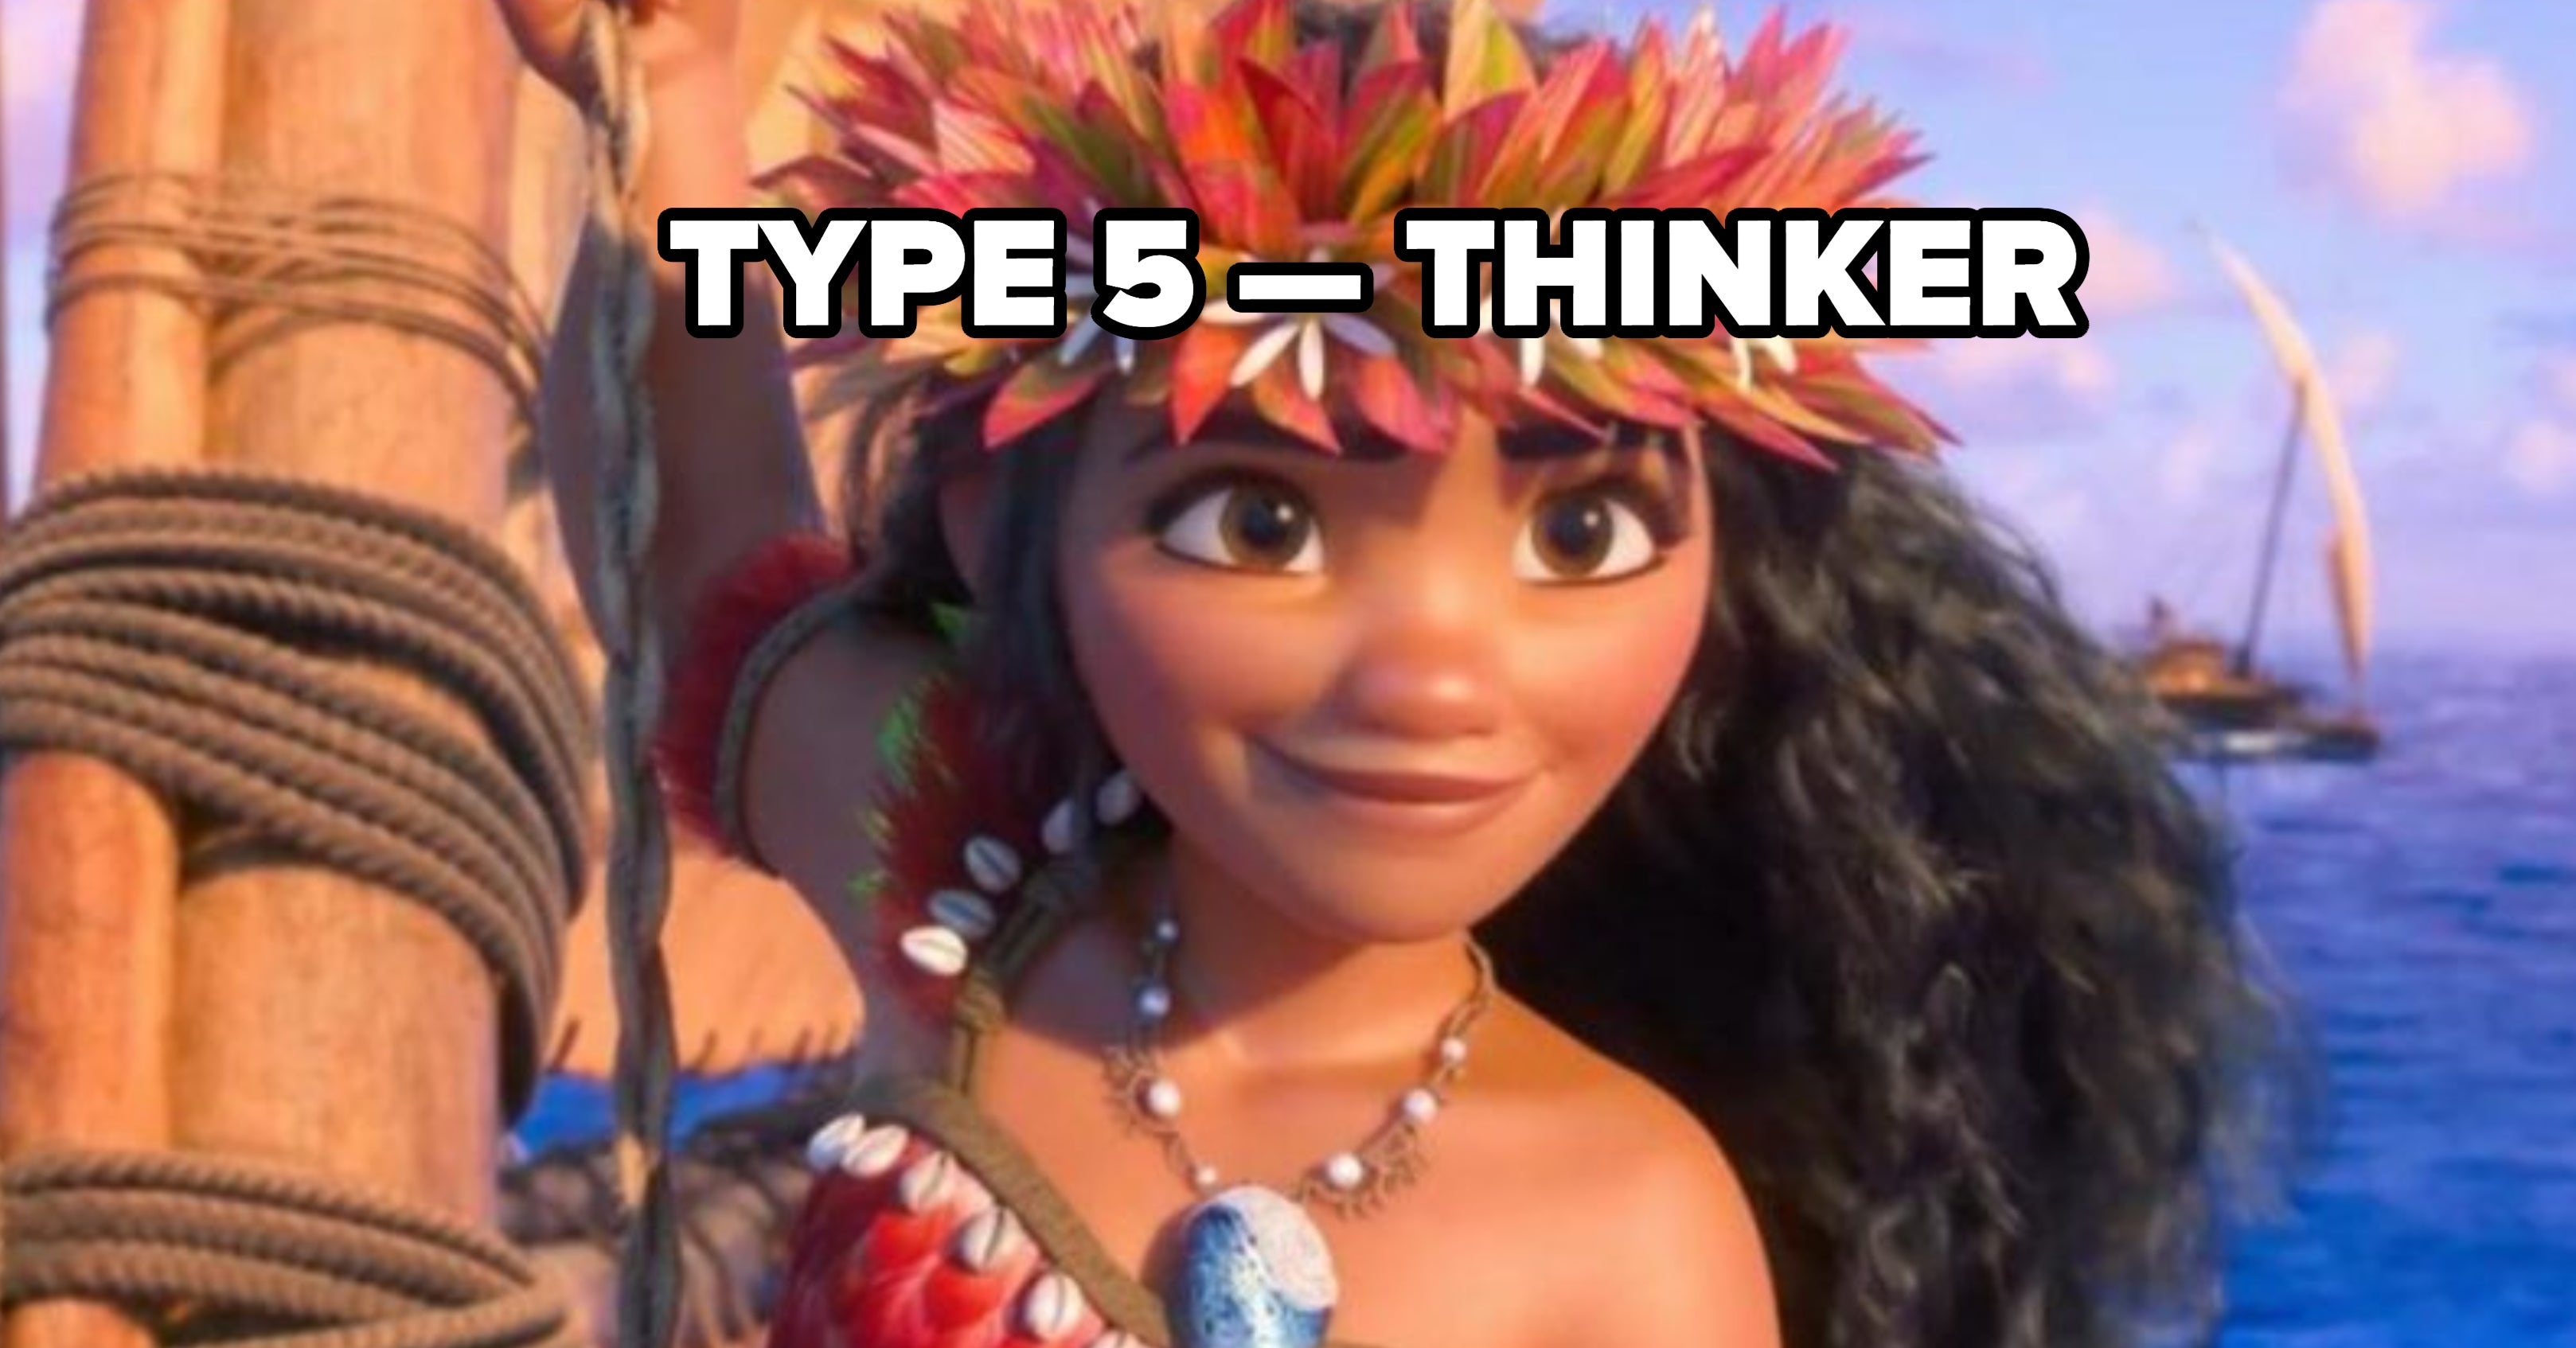 What Personality Types Are the Disney Princesses?